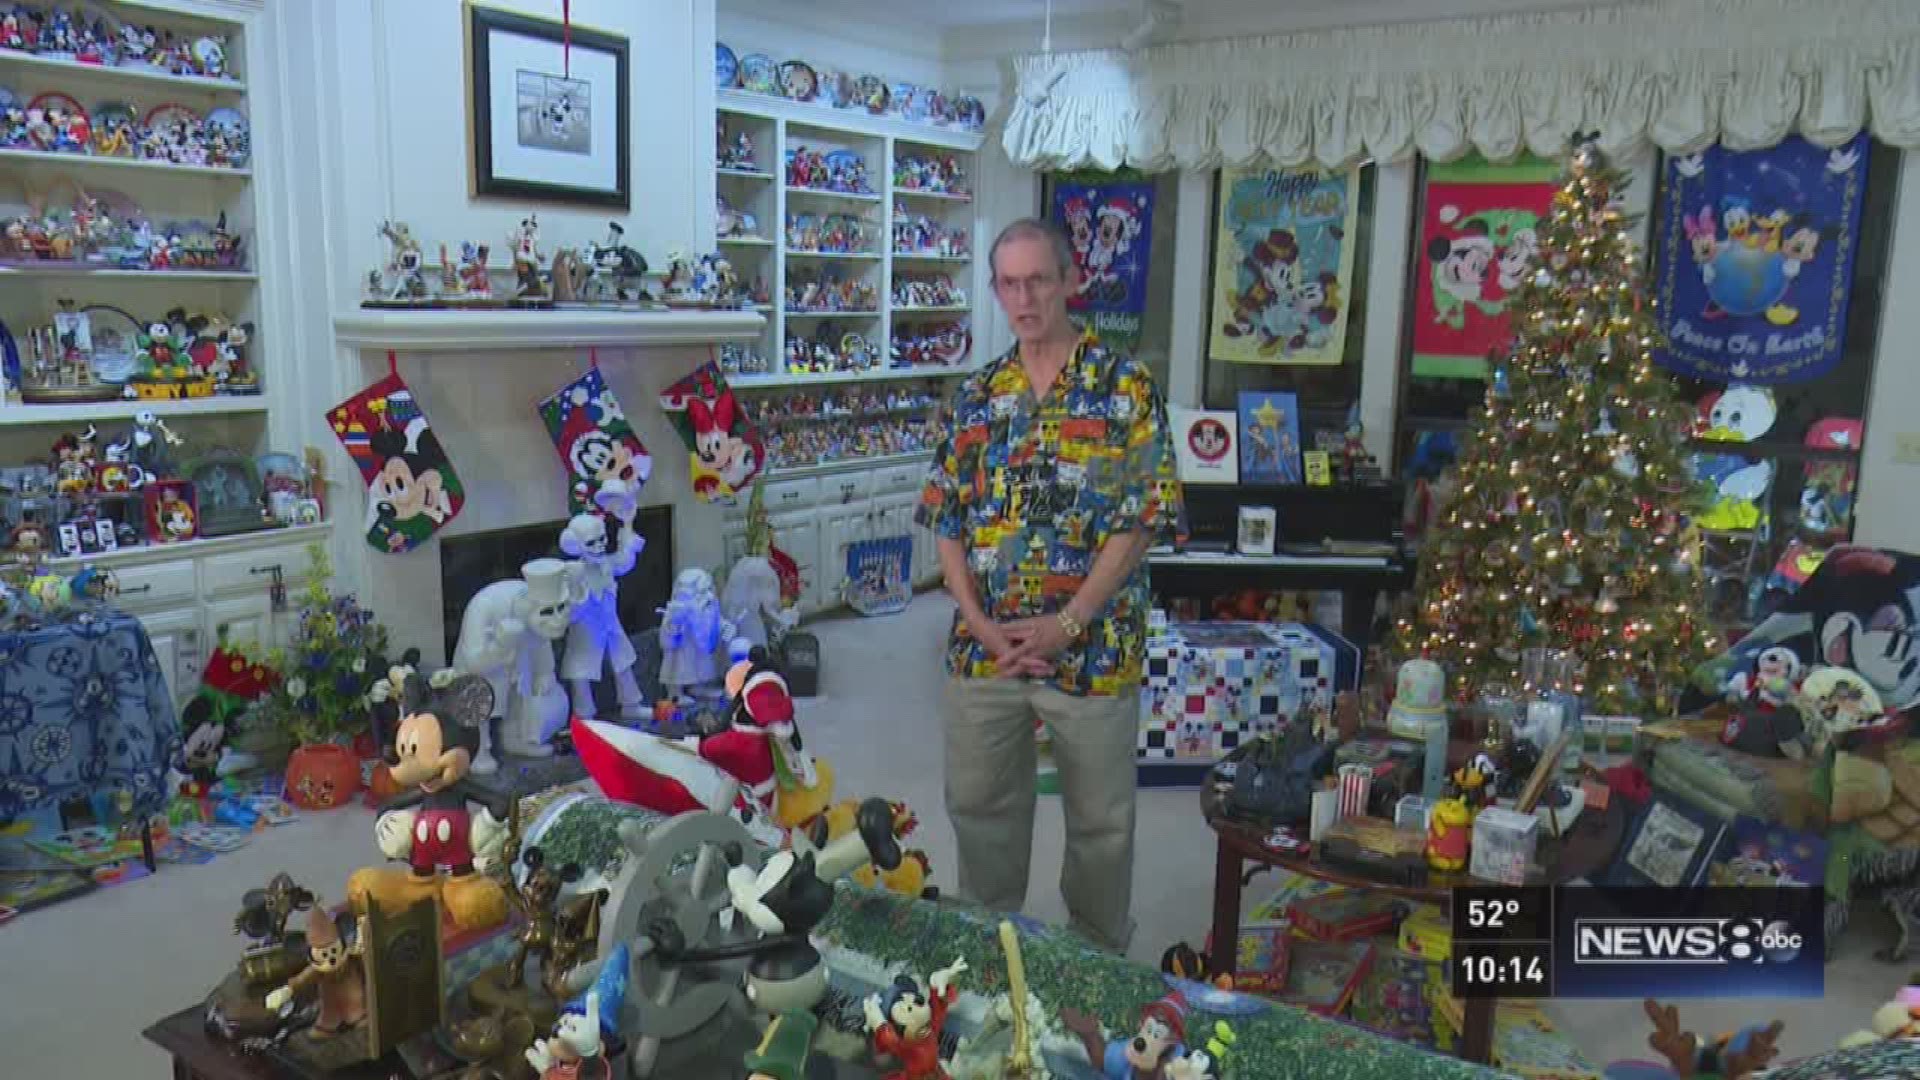 Lesson from Plano man's 9,000-item Disney collection? Live your dreams